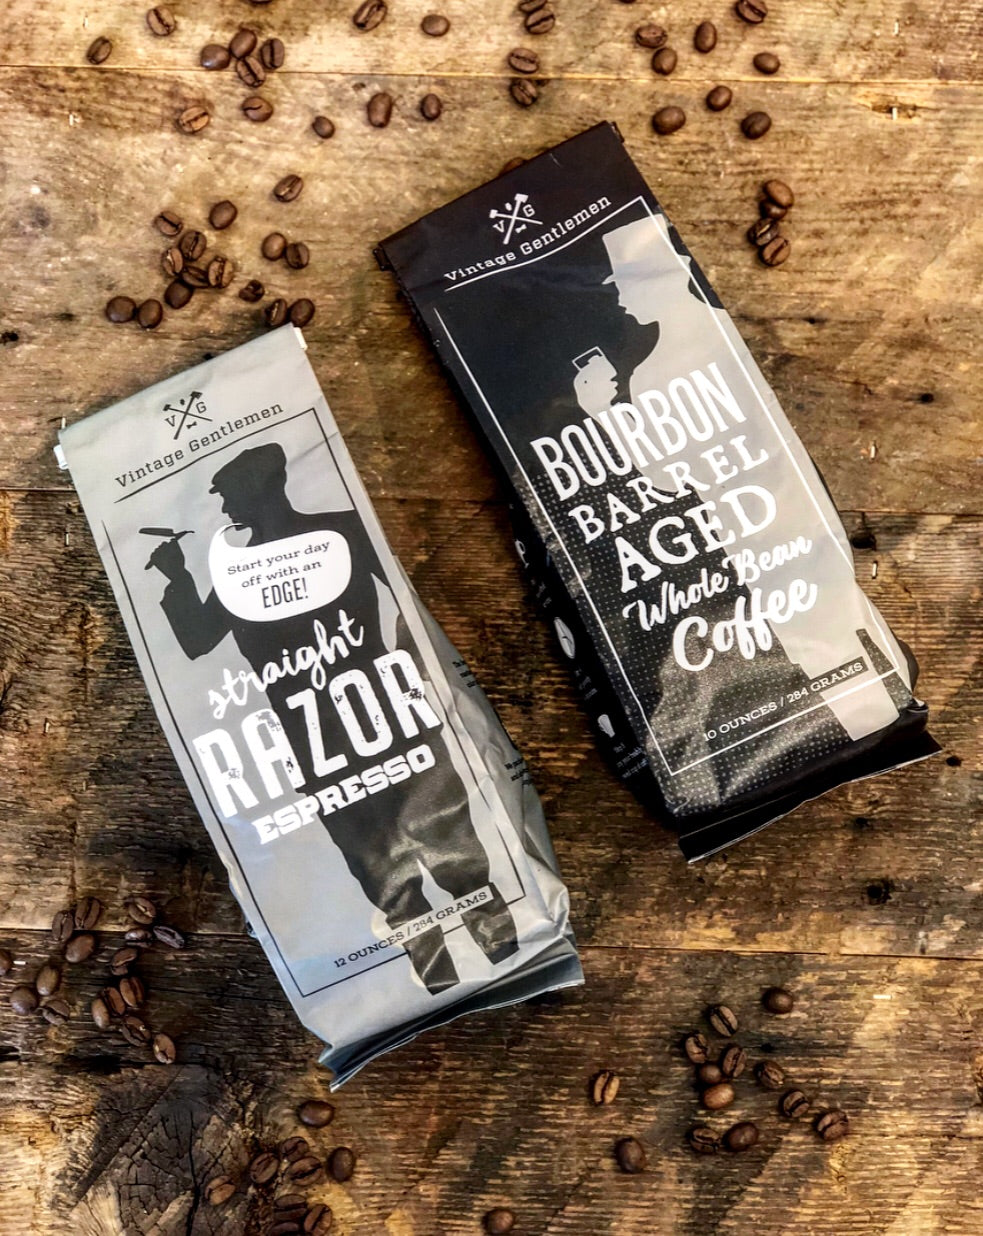 Bourbon Barrel Aged Coffee And Espresso Combo Pack